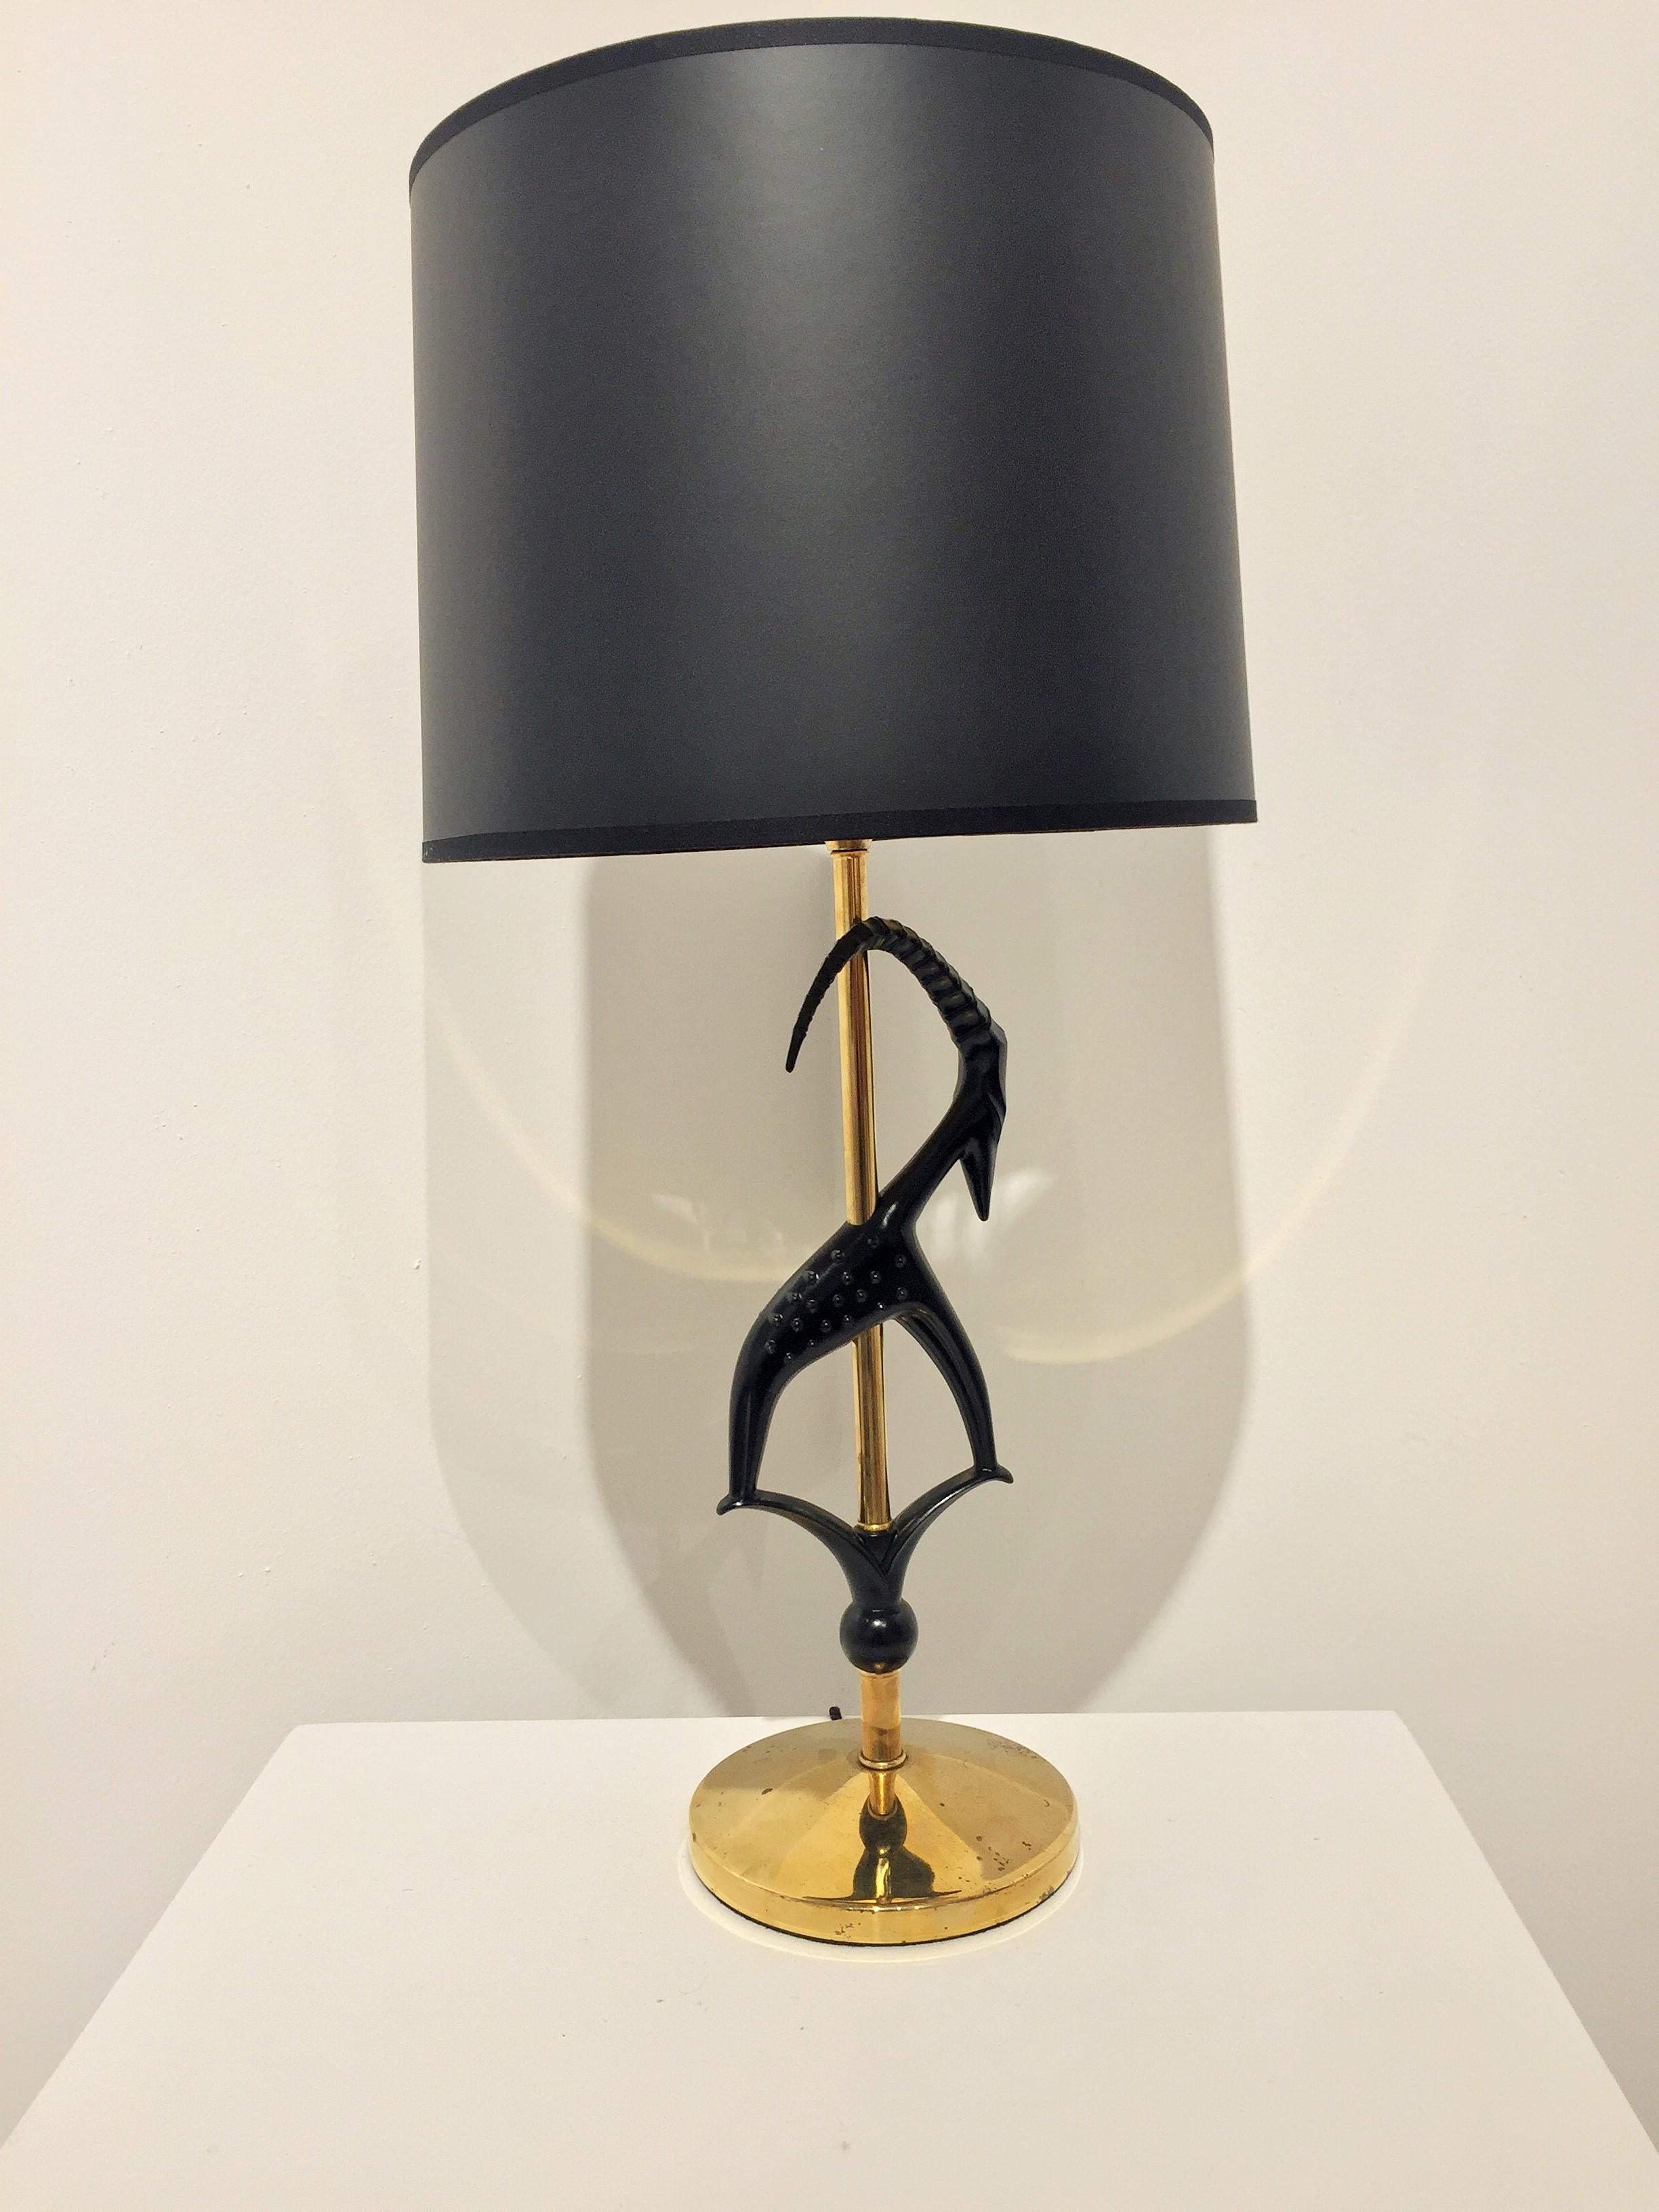 Iron 1950s Gazelle Lamp by Rembrandt Lamp Company